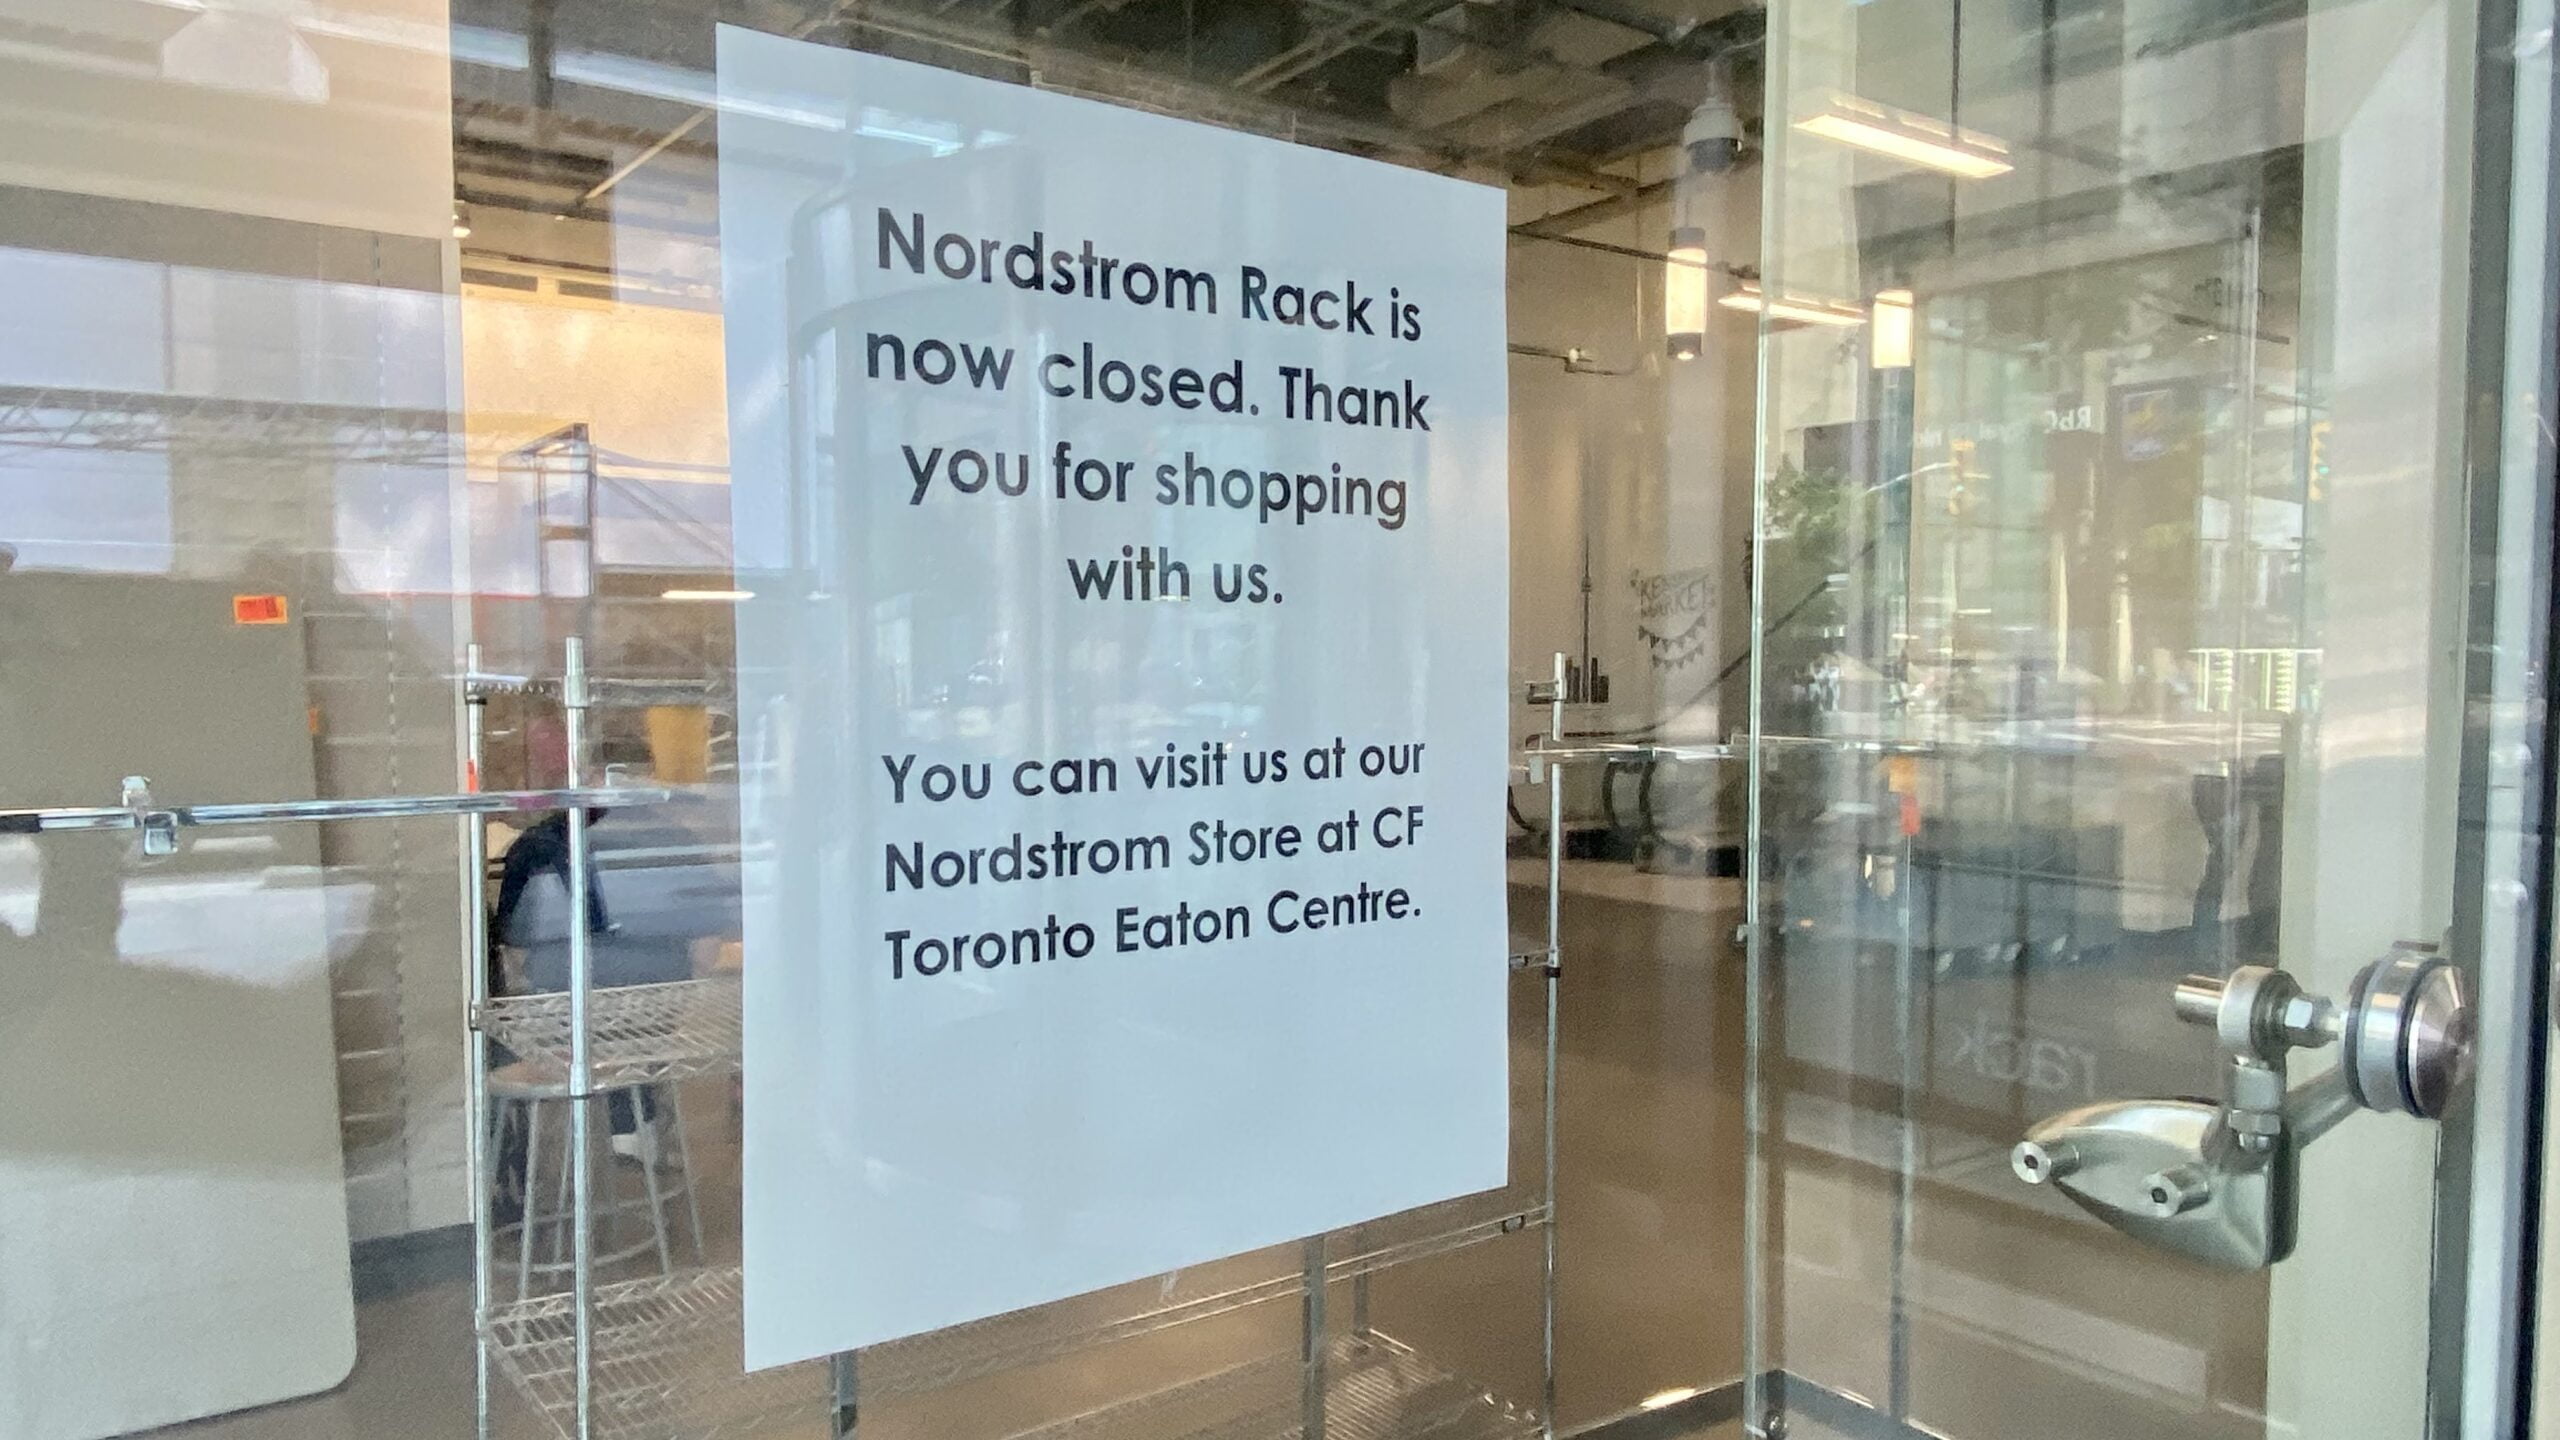 Nordstrom Rack bets on premium merchandise in the face of rising prices -  RetailWire